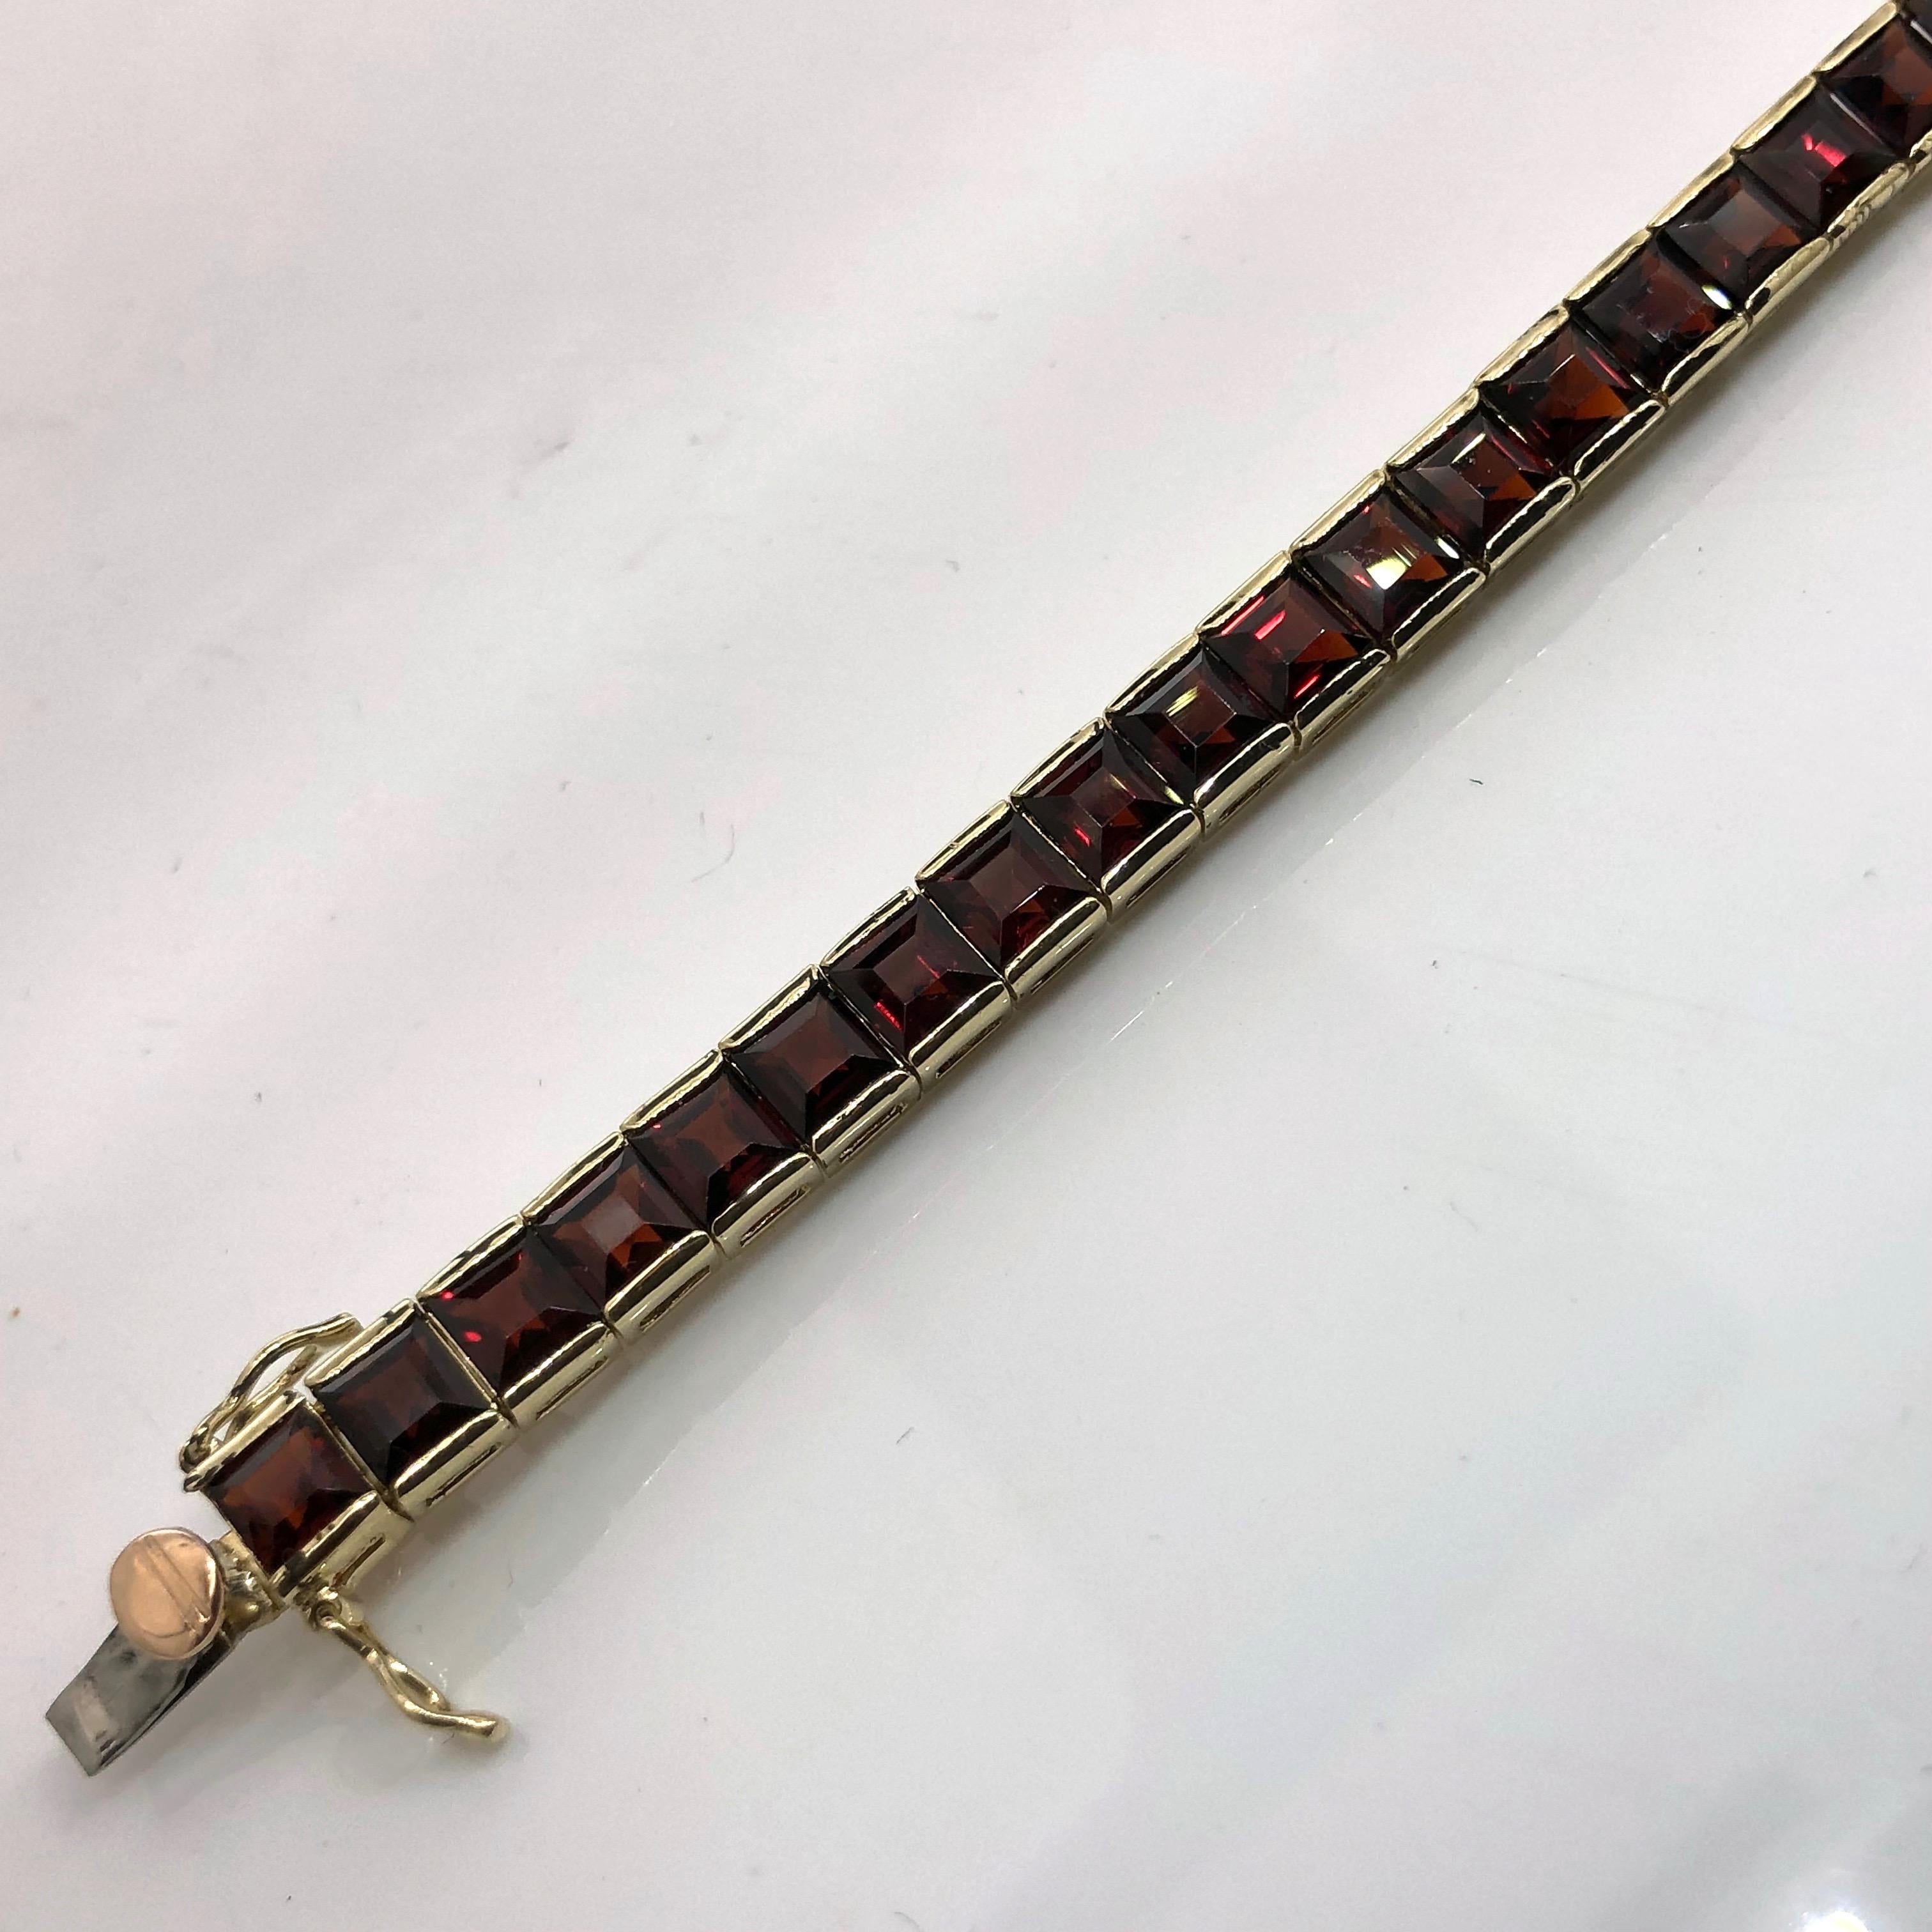 Rare find! 14 carat yellow gold square link tennis bracelet set with 5 mm carre cut deep red Bohemian garnets .
Box clasp with two safety clips,
Bracelet length is 18 cm, closed diameter is 5.8 cm, thickness is 5.4mm.
Weight of the bracelet is 13.2